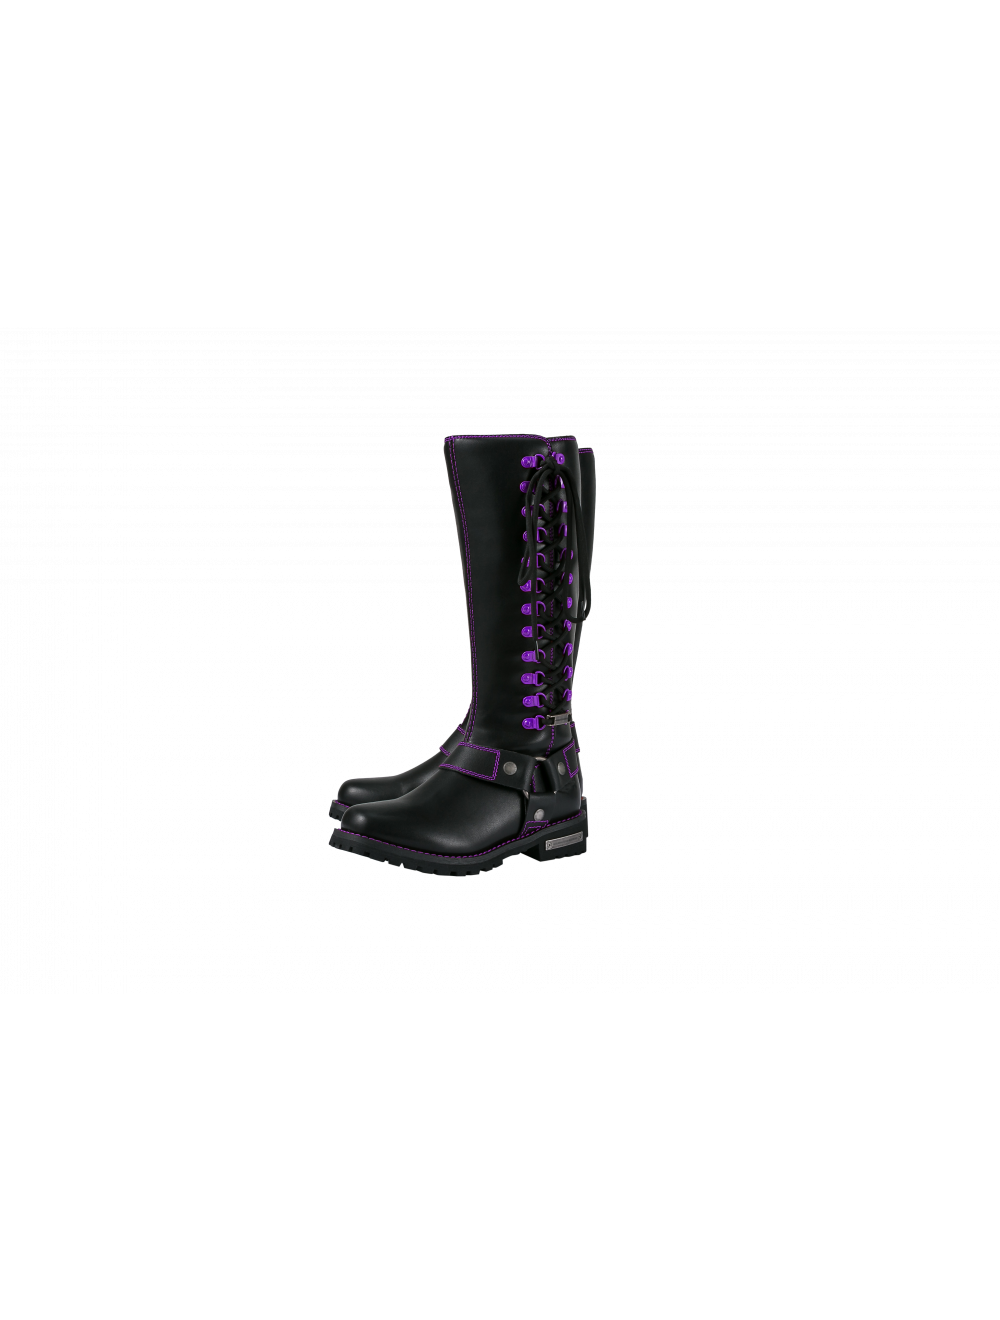 Women's Boots with Purple Stitching & Laces